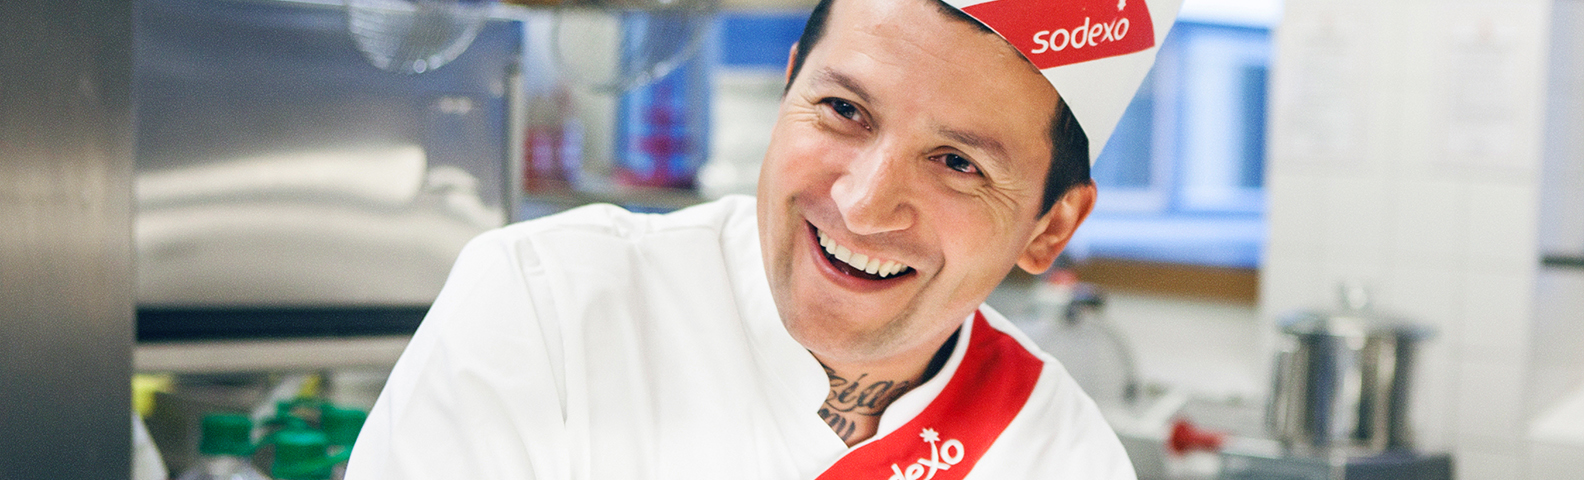 A smiling Sodexo chef in the kitchen